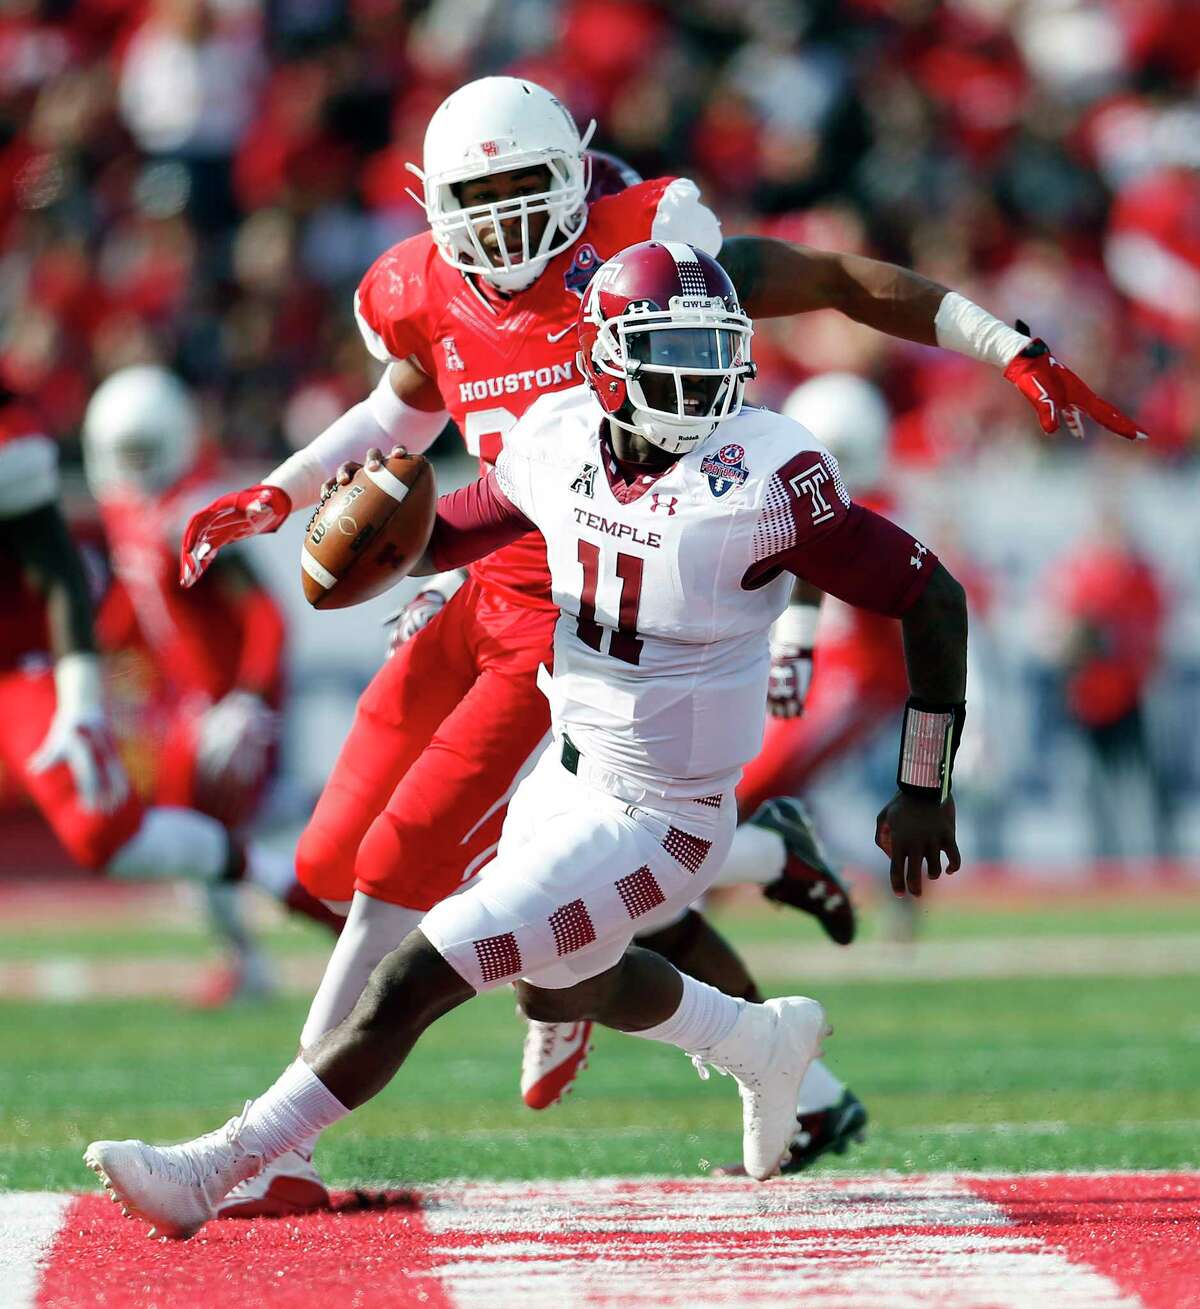 Temple Owls quarterback P.J. Walker (11) scrambles against the defense of Houston Cougars defensive end Cameron Malveaux (94) during the fourth quarter of the American Athletic Conference Championship football game at TDECU Stadium on Saturday, Dec. 5, 2015, in Houston ( Karen Warren / Houston Chronicle )